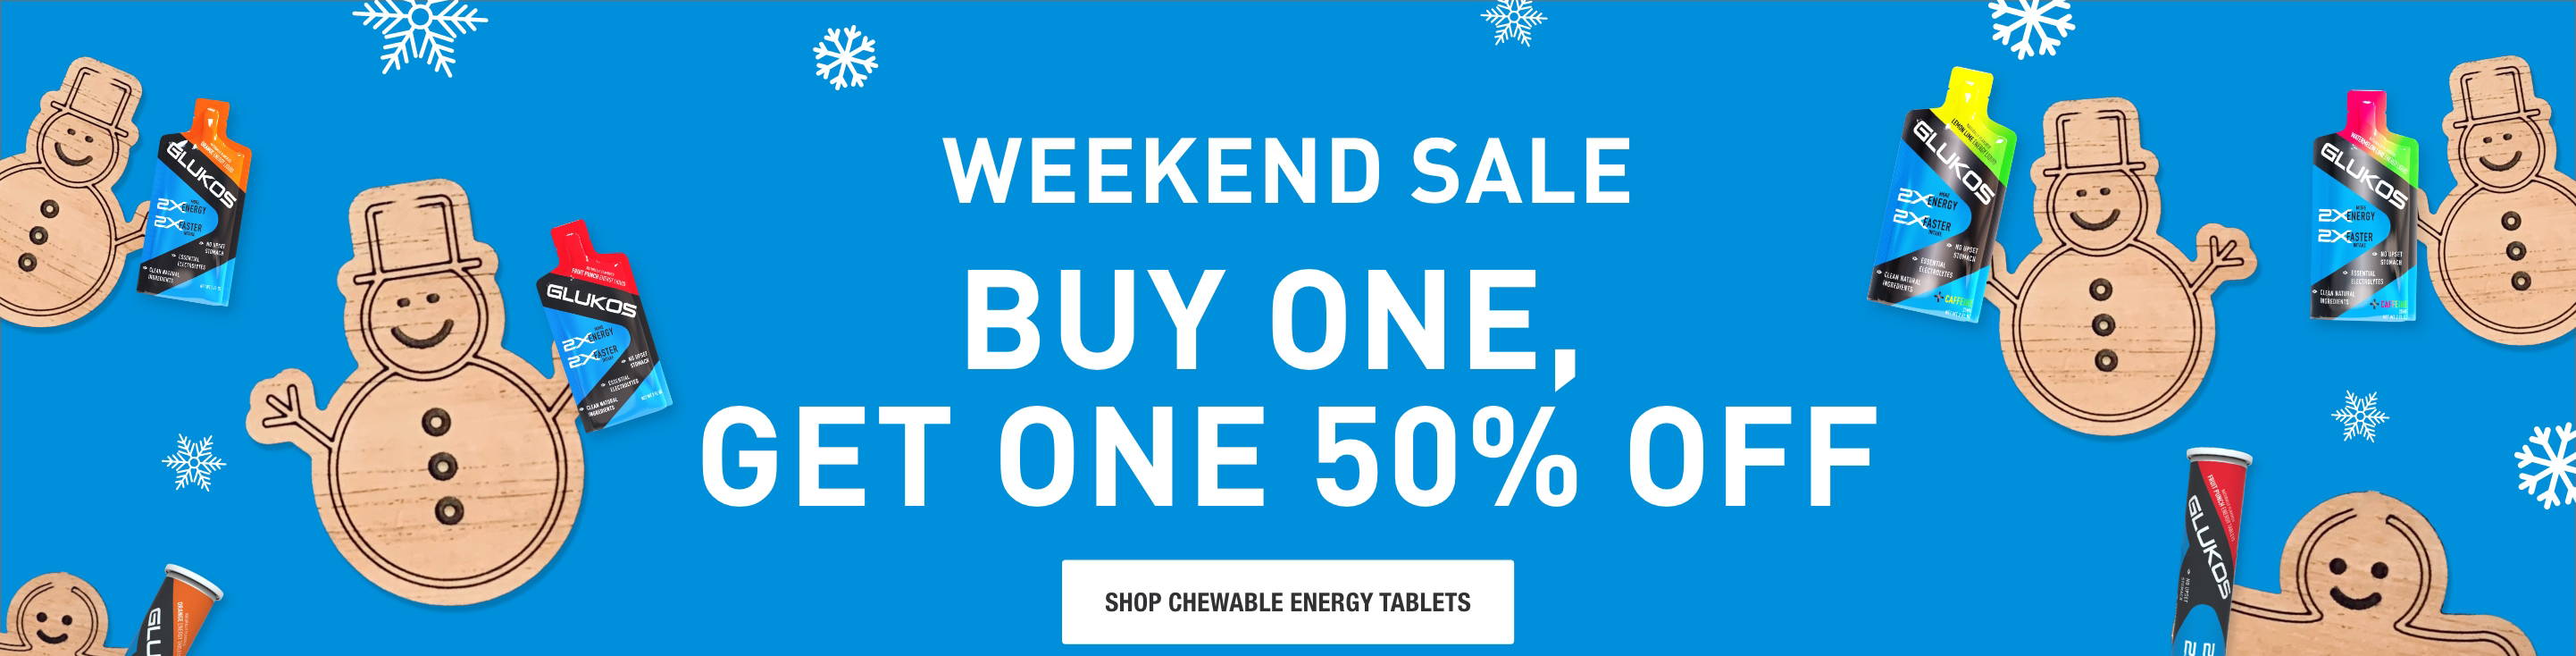 Weekend Sale. Buy One, Get One 50% Off Shop Chewable Energy Tablets